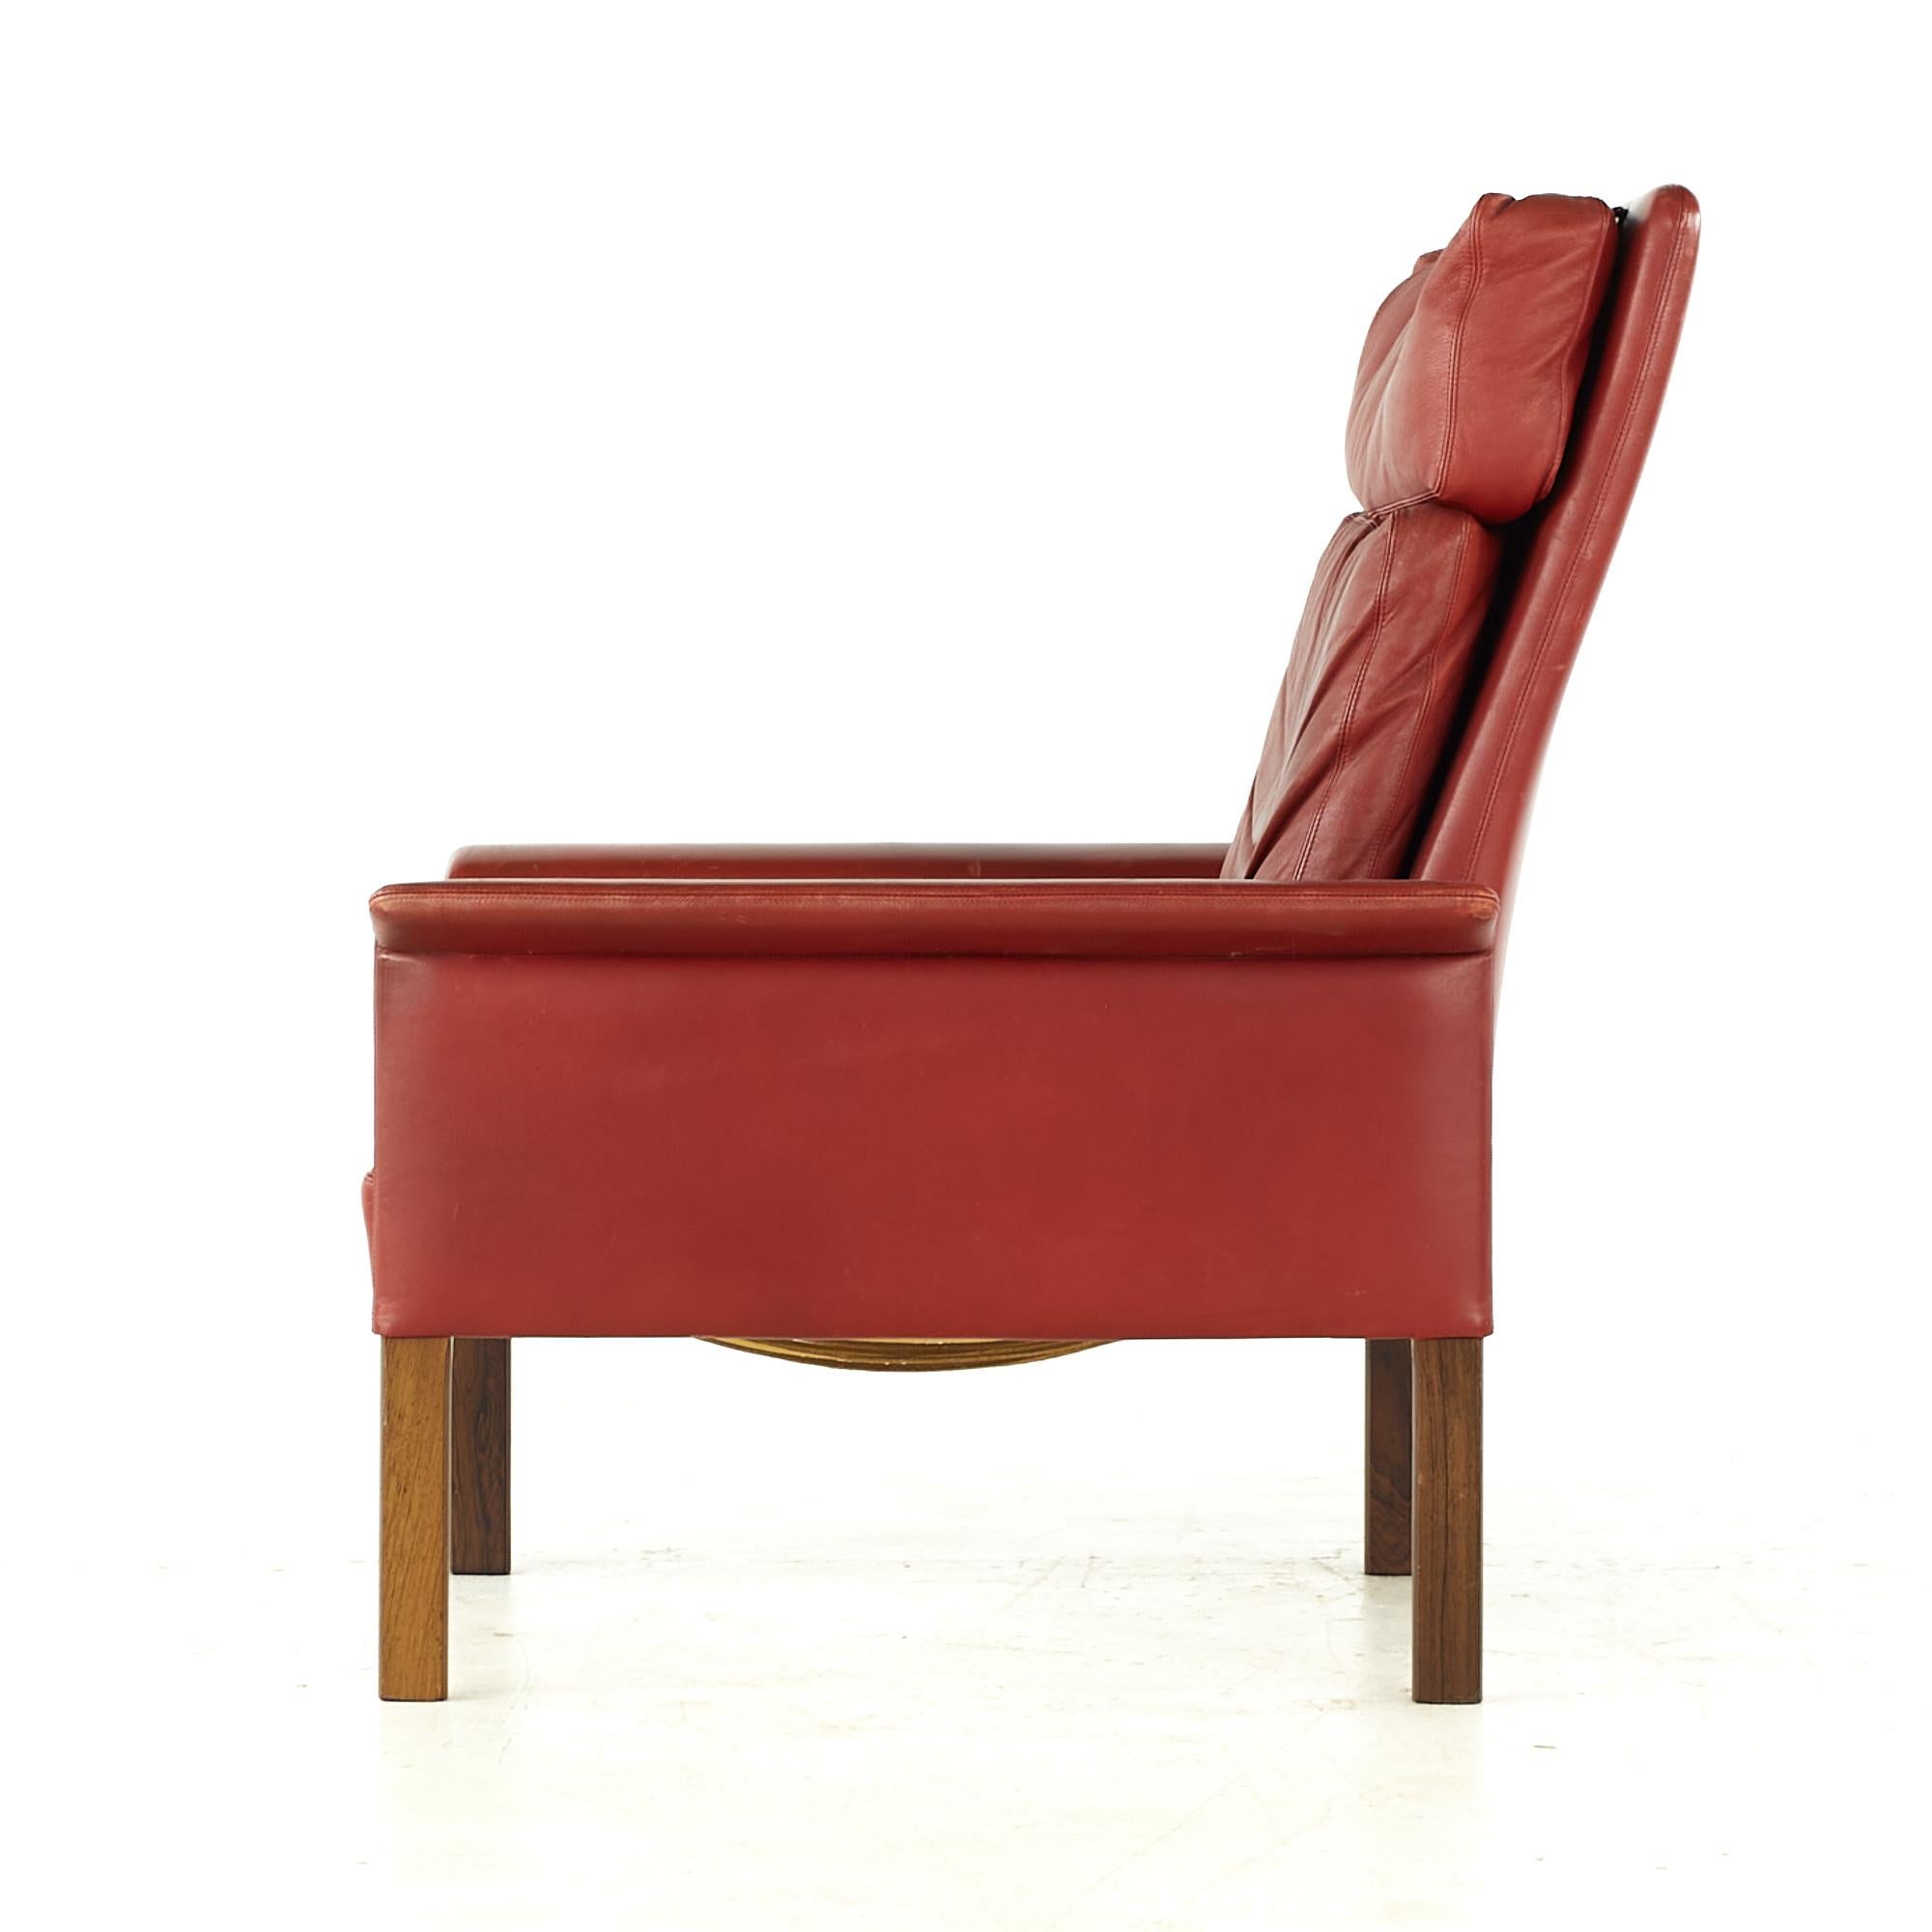 Hans Olsen Midcentury Danish Rosewood and Red Leather Chairs, Pair For Sale 4